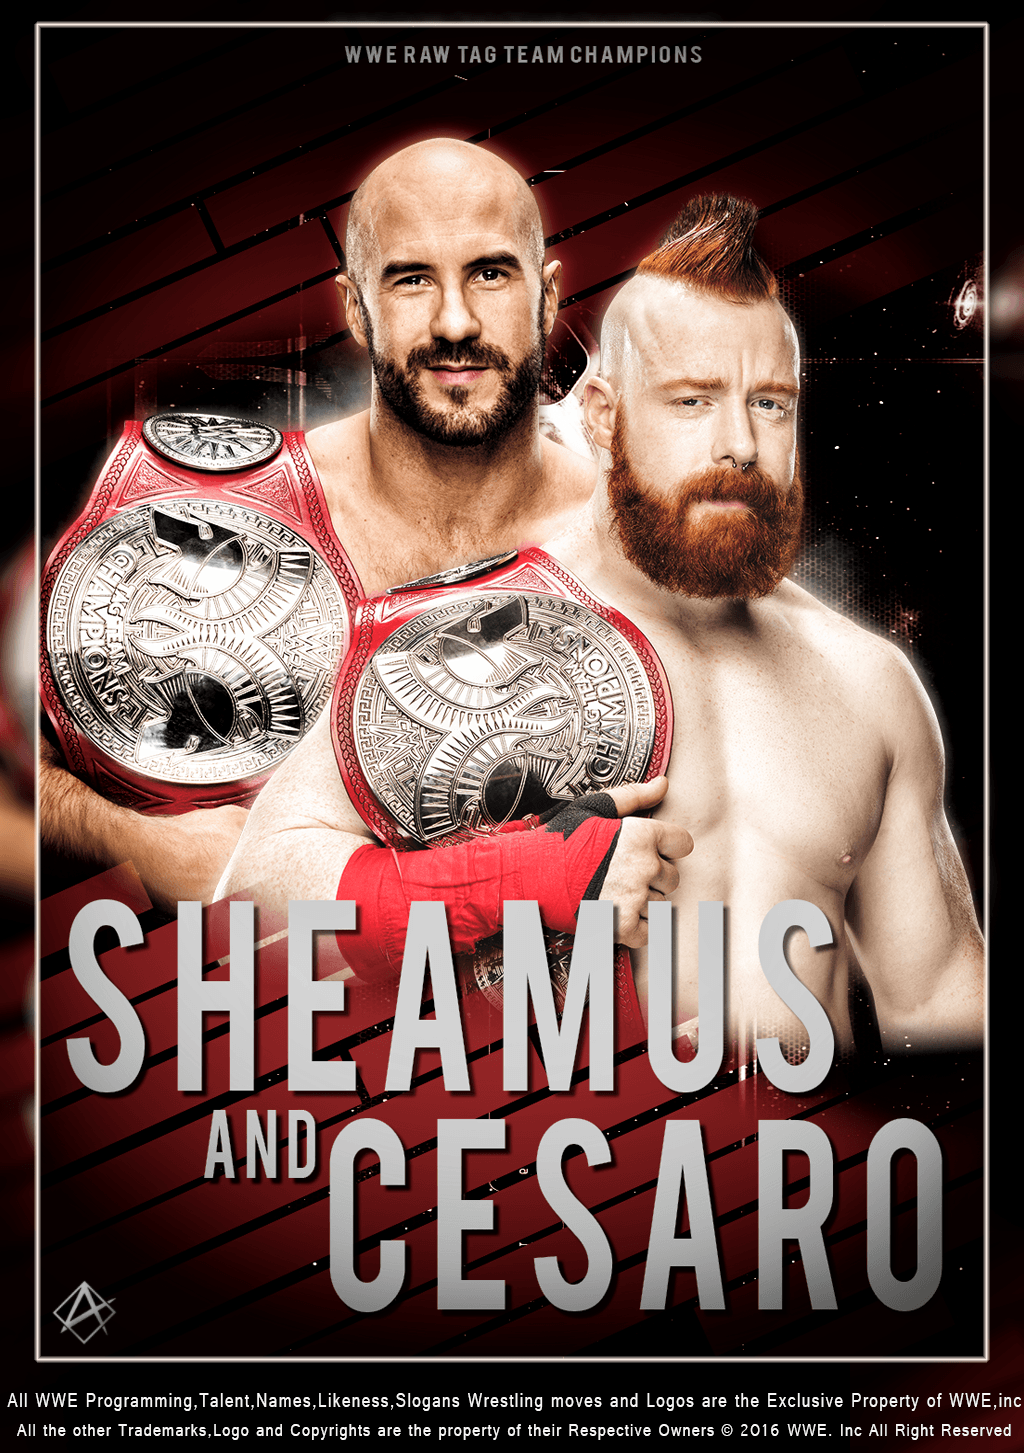 Sheamus and Cesaro TagTeam Champion Poster